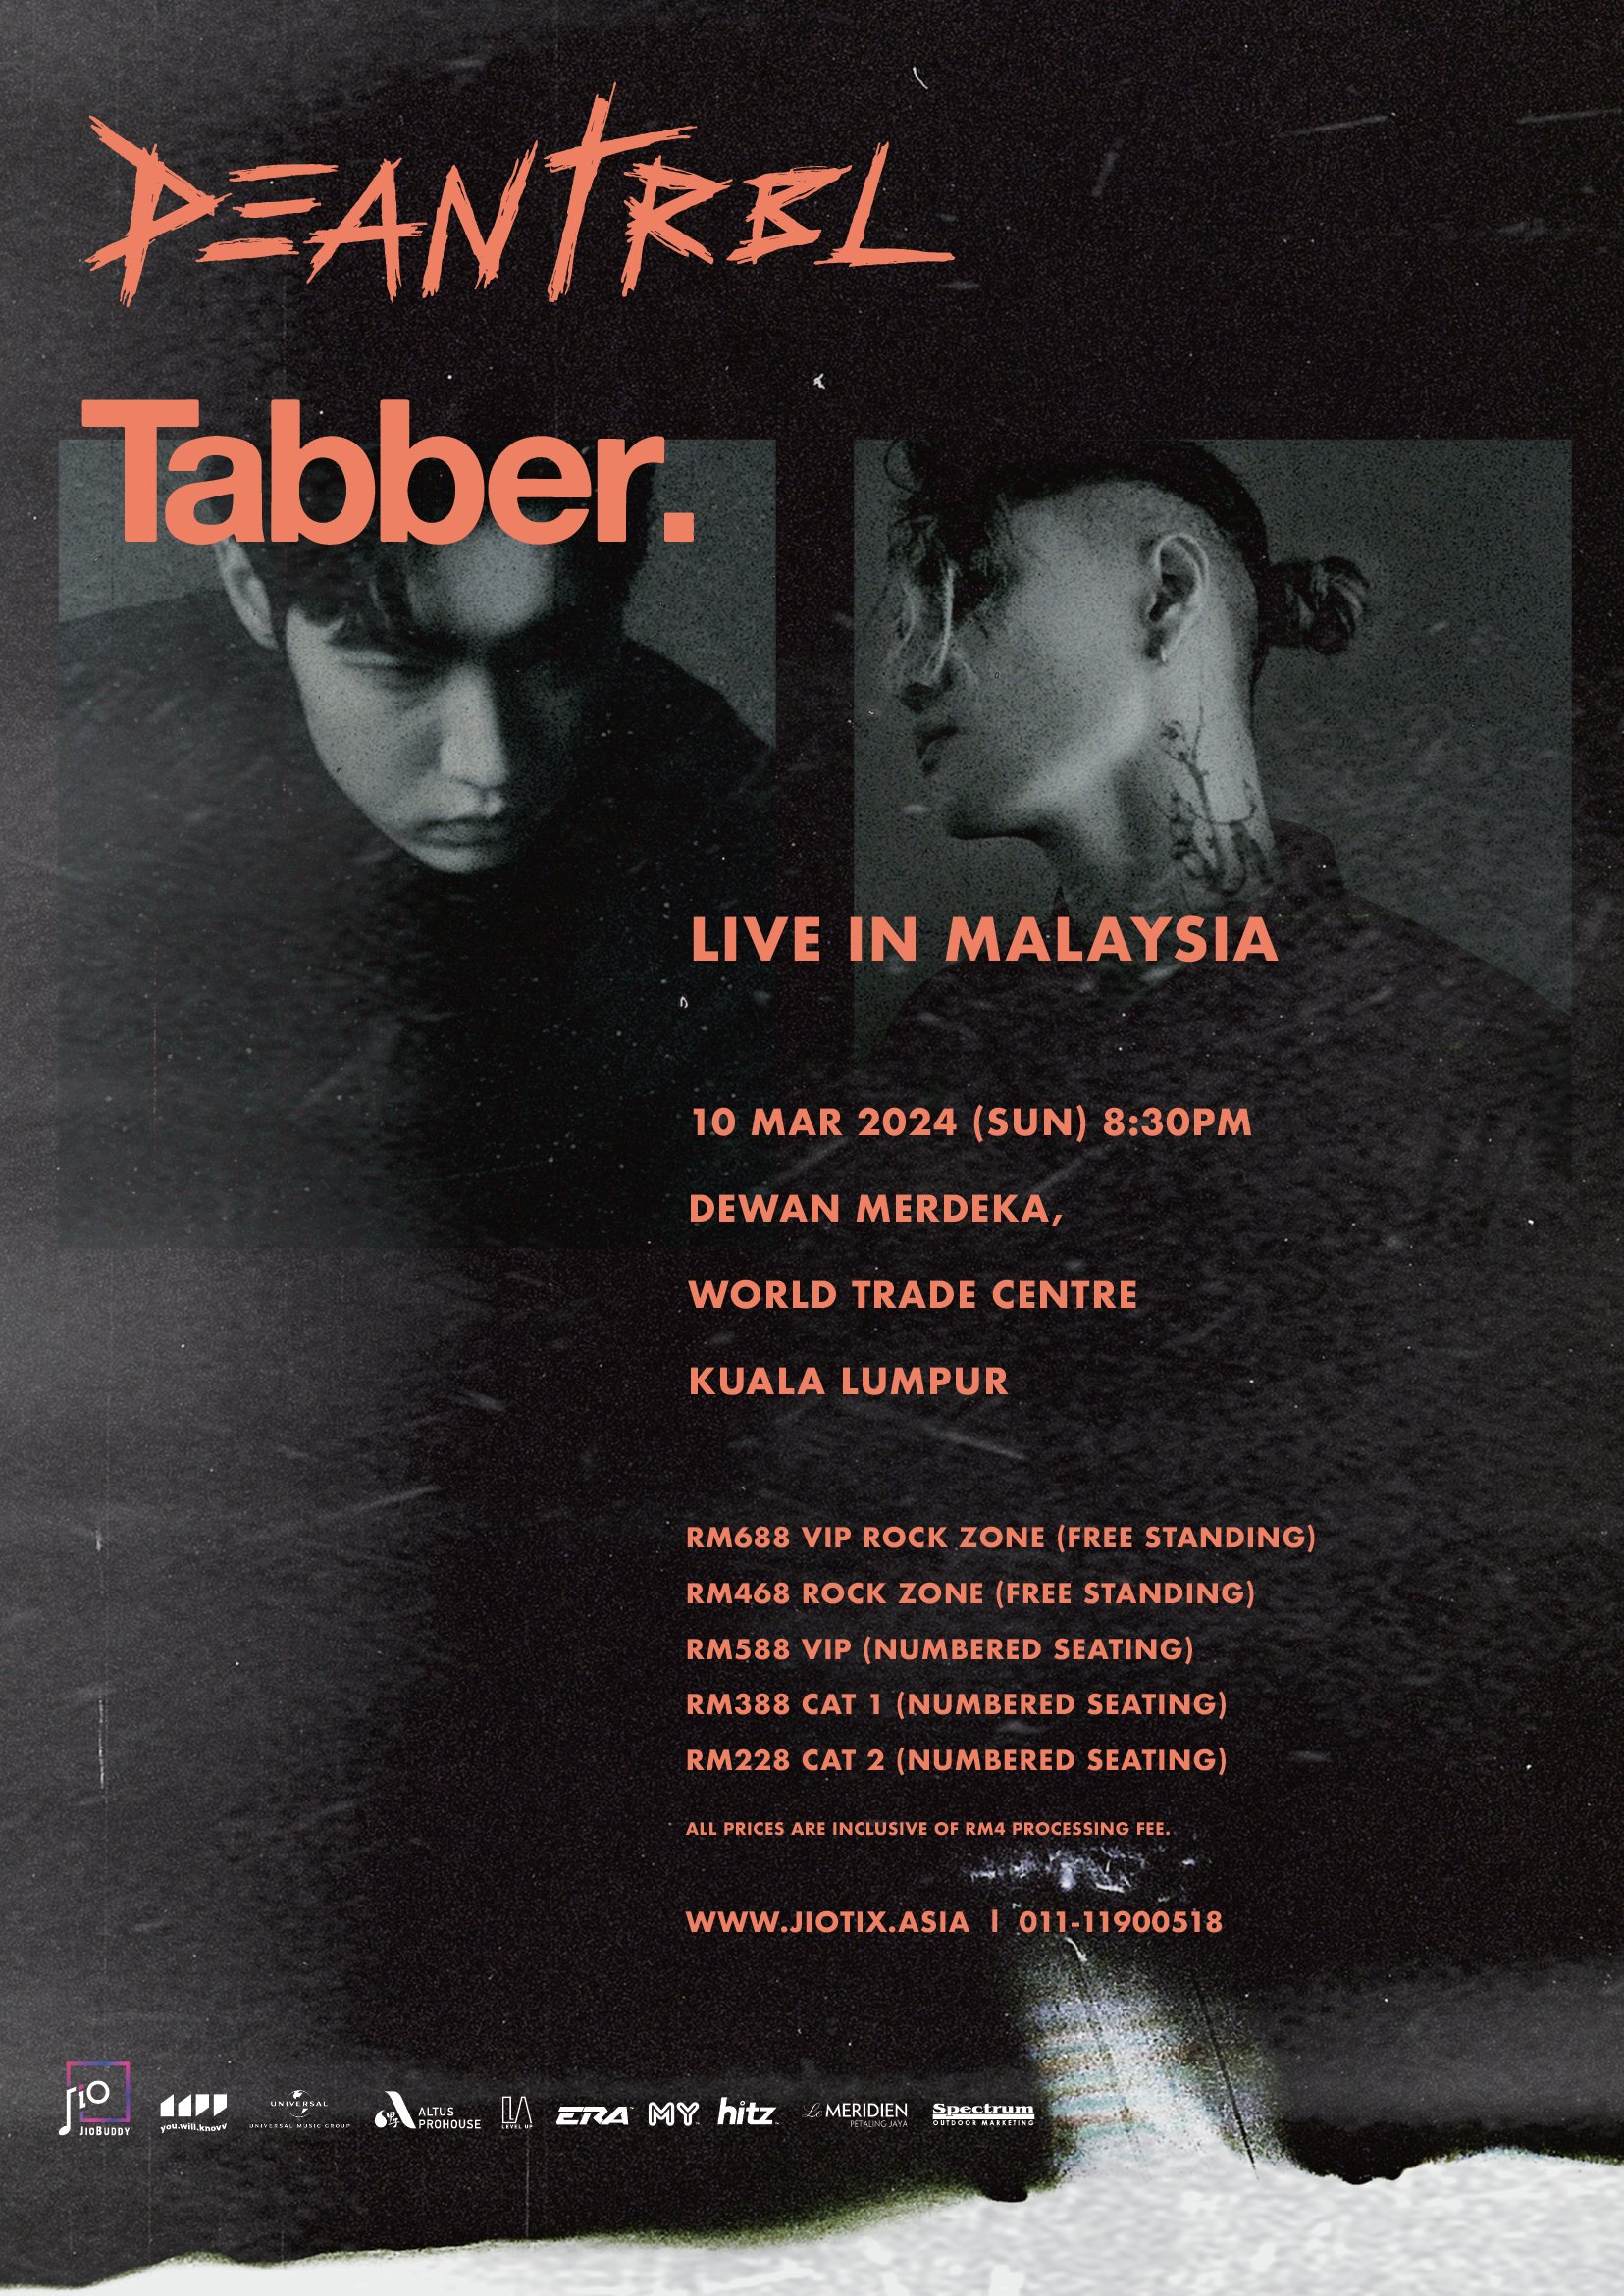 DEAN x Tabber live in Malaysia (Tickets)